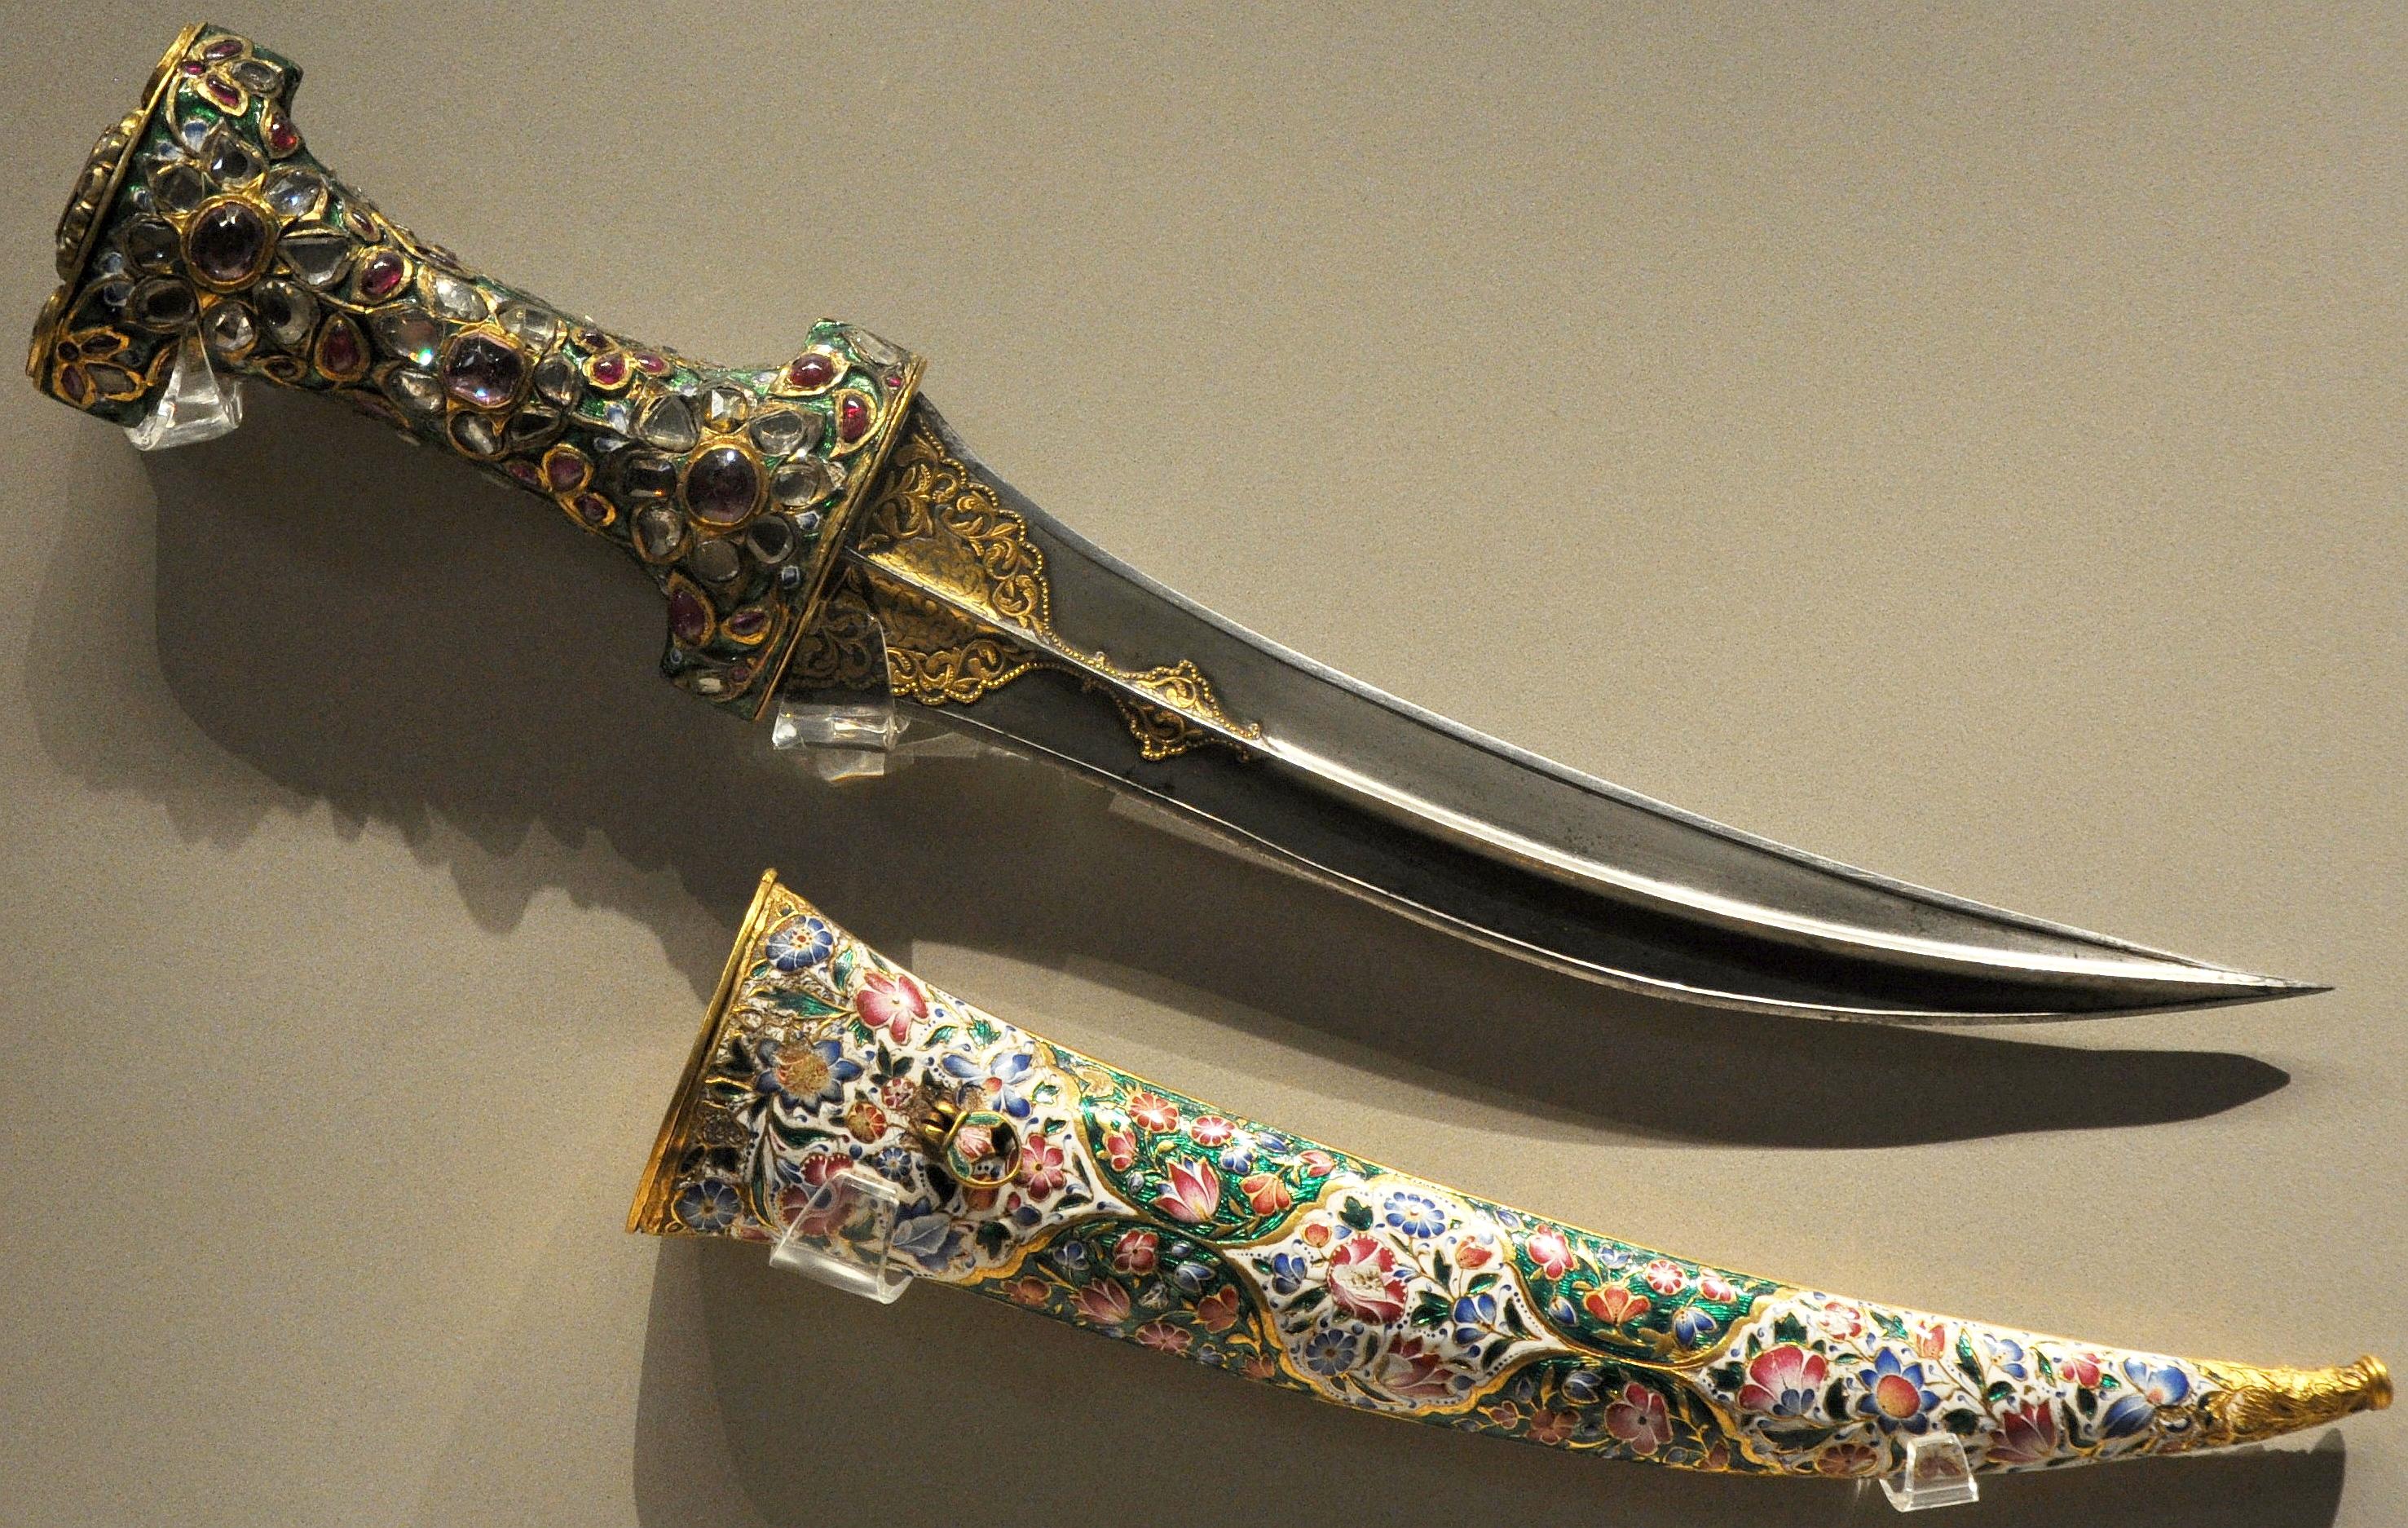 Fath-Ali Shah's jeweled dagger was one of his personal daggers, which is famous for its beautiful and dedicated jewels. Fath-Ali Shah was the second king of Qajar dynasty, who ruled Iran from 1769 to 1834.jpg